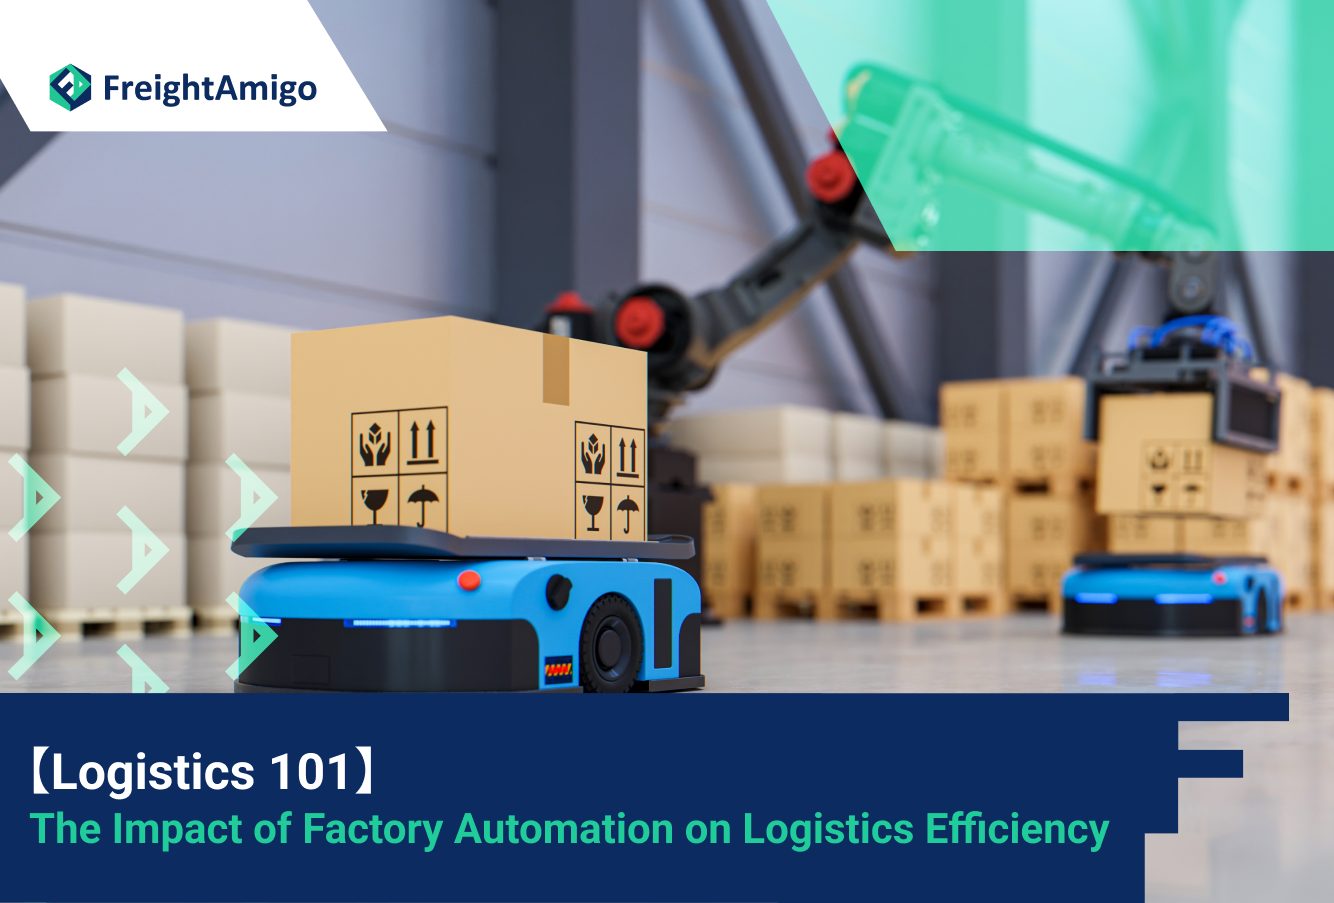 【Logistics 101】The Impact of Factory Automation on Logistics Efficiency